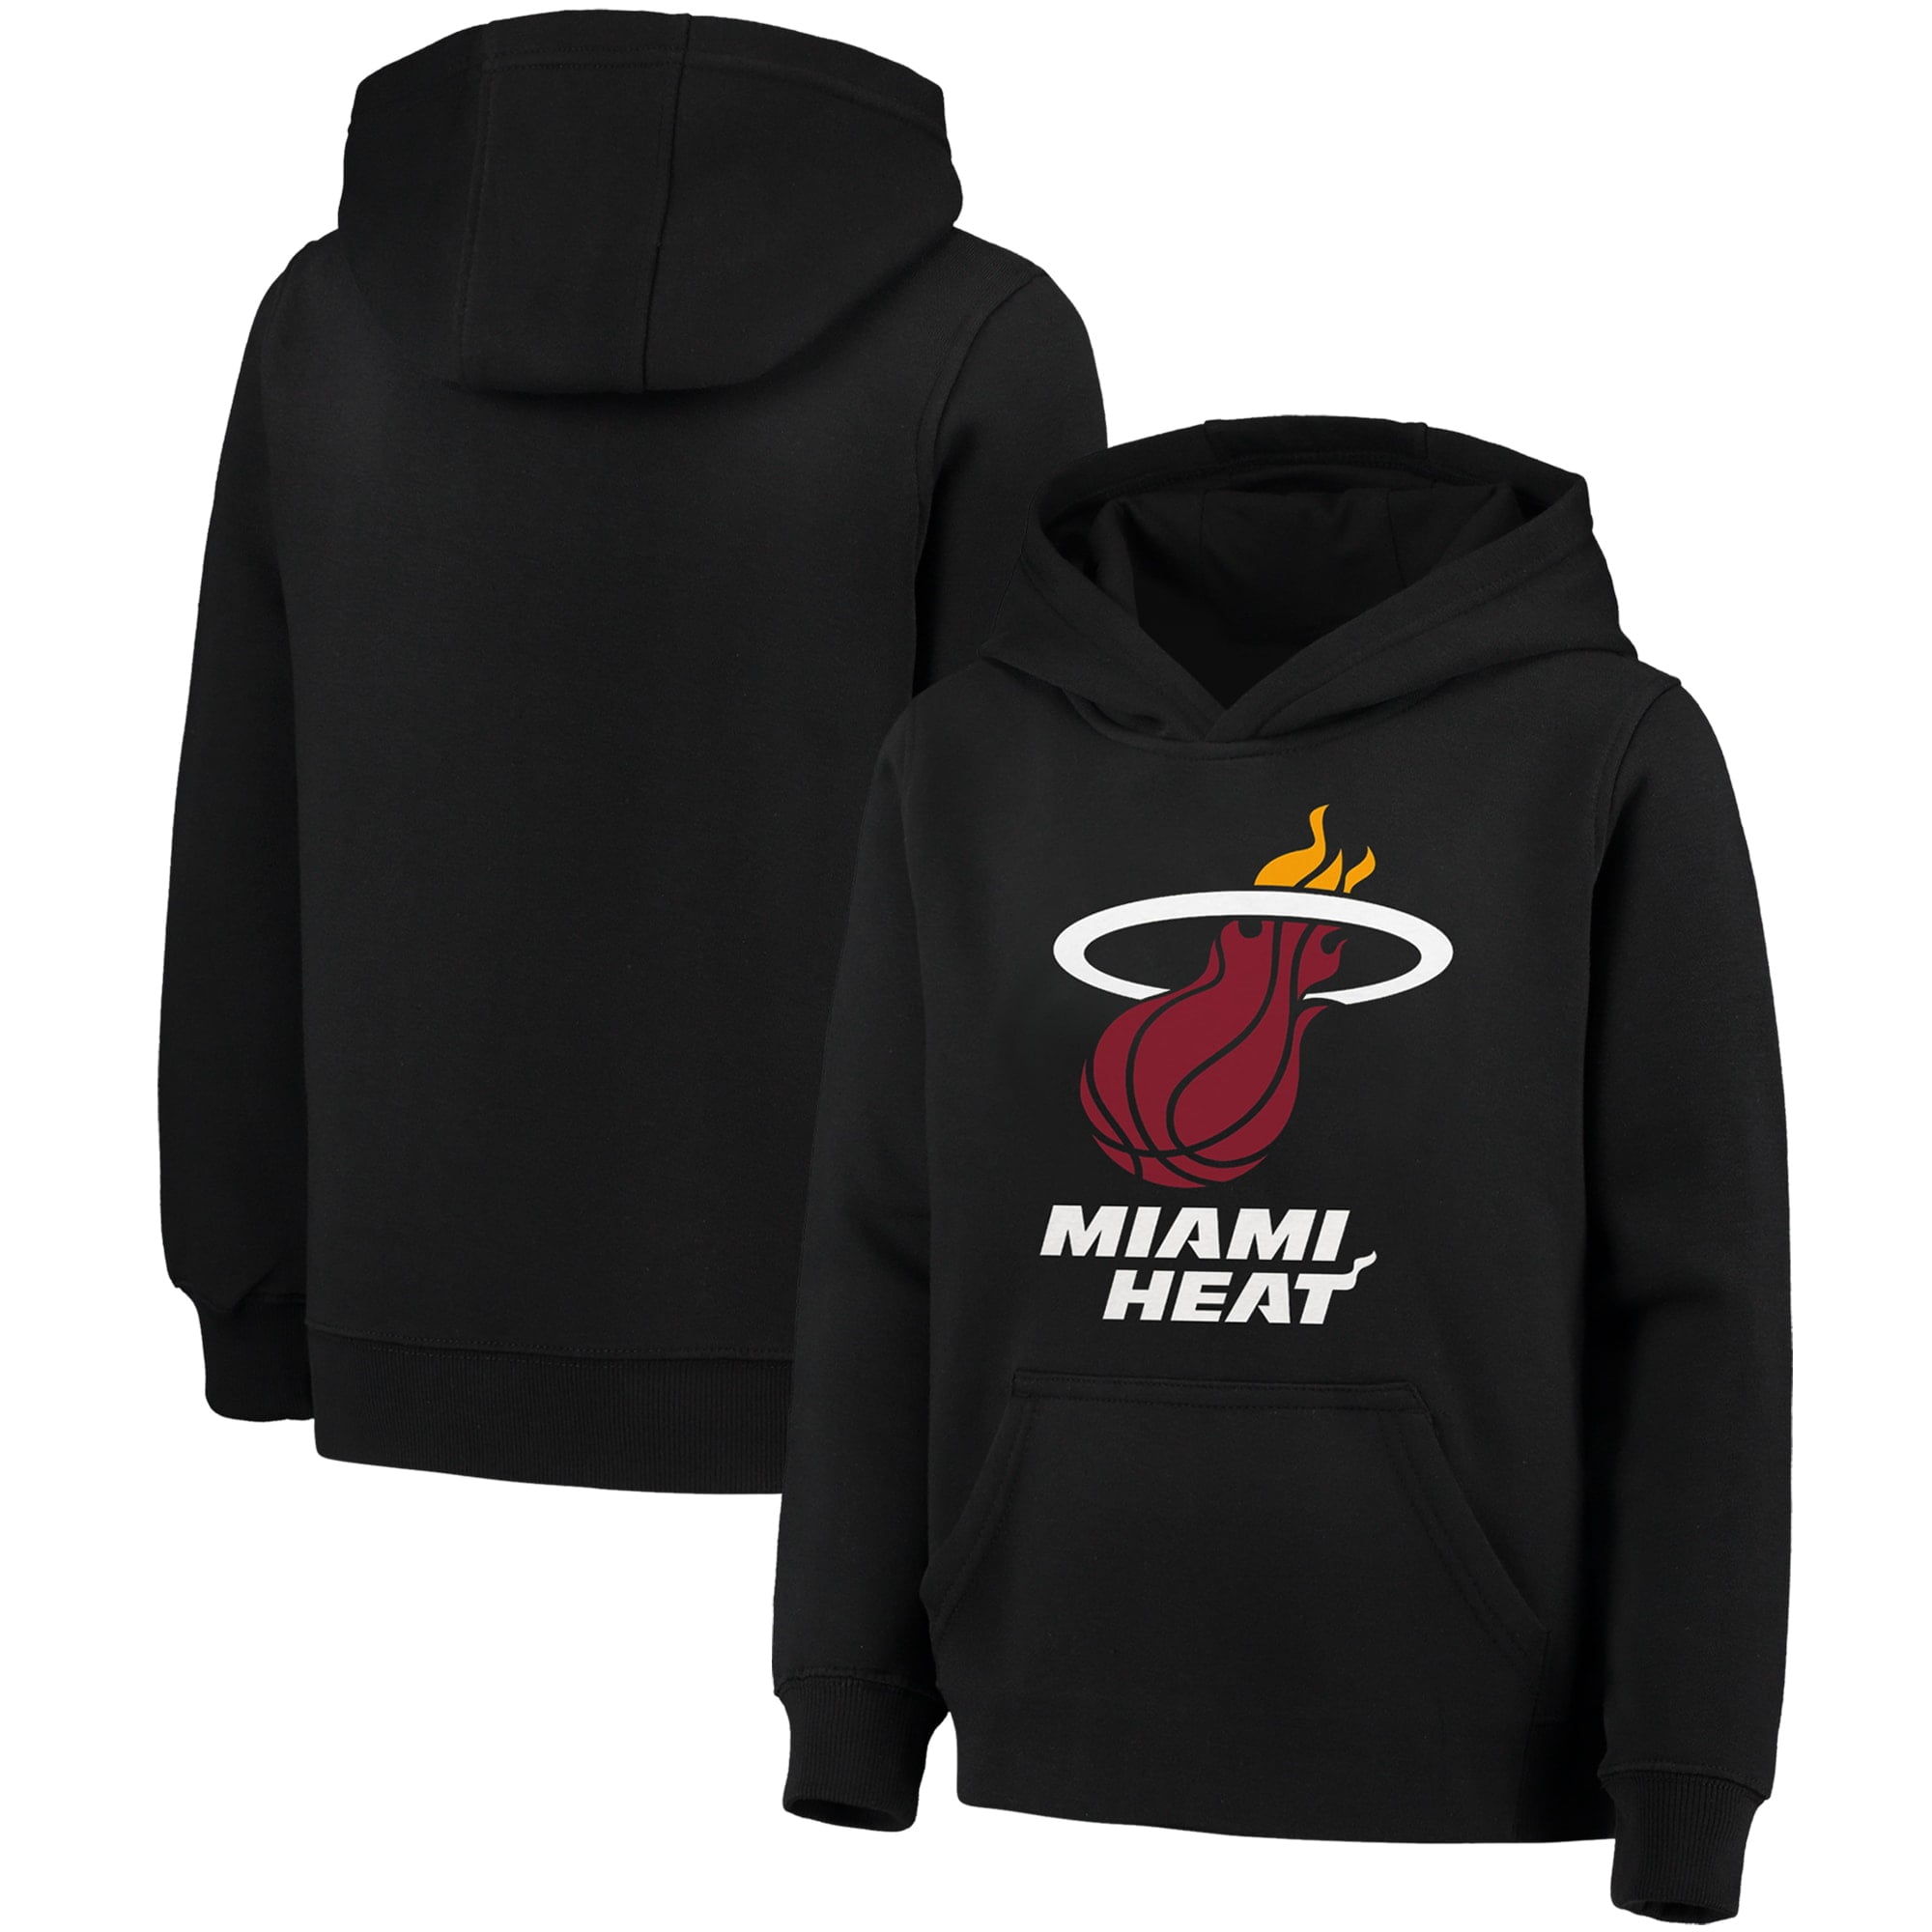 Outerstuff - Miami Heat Youth Primary Logo Fleece Pullover Hoodie